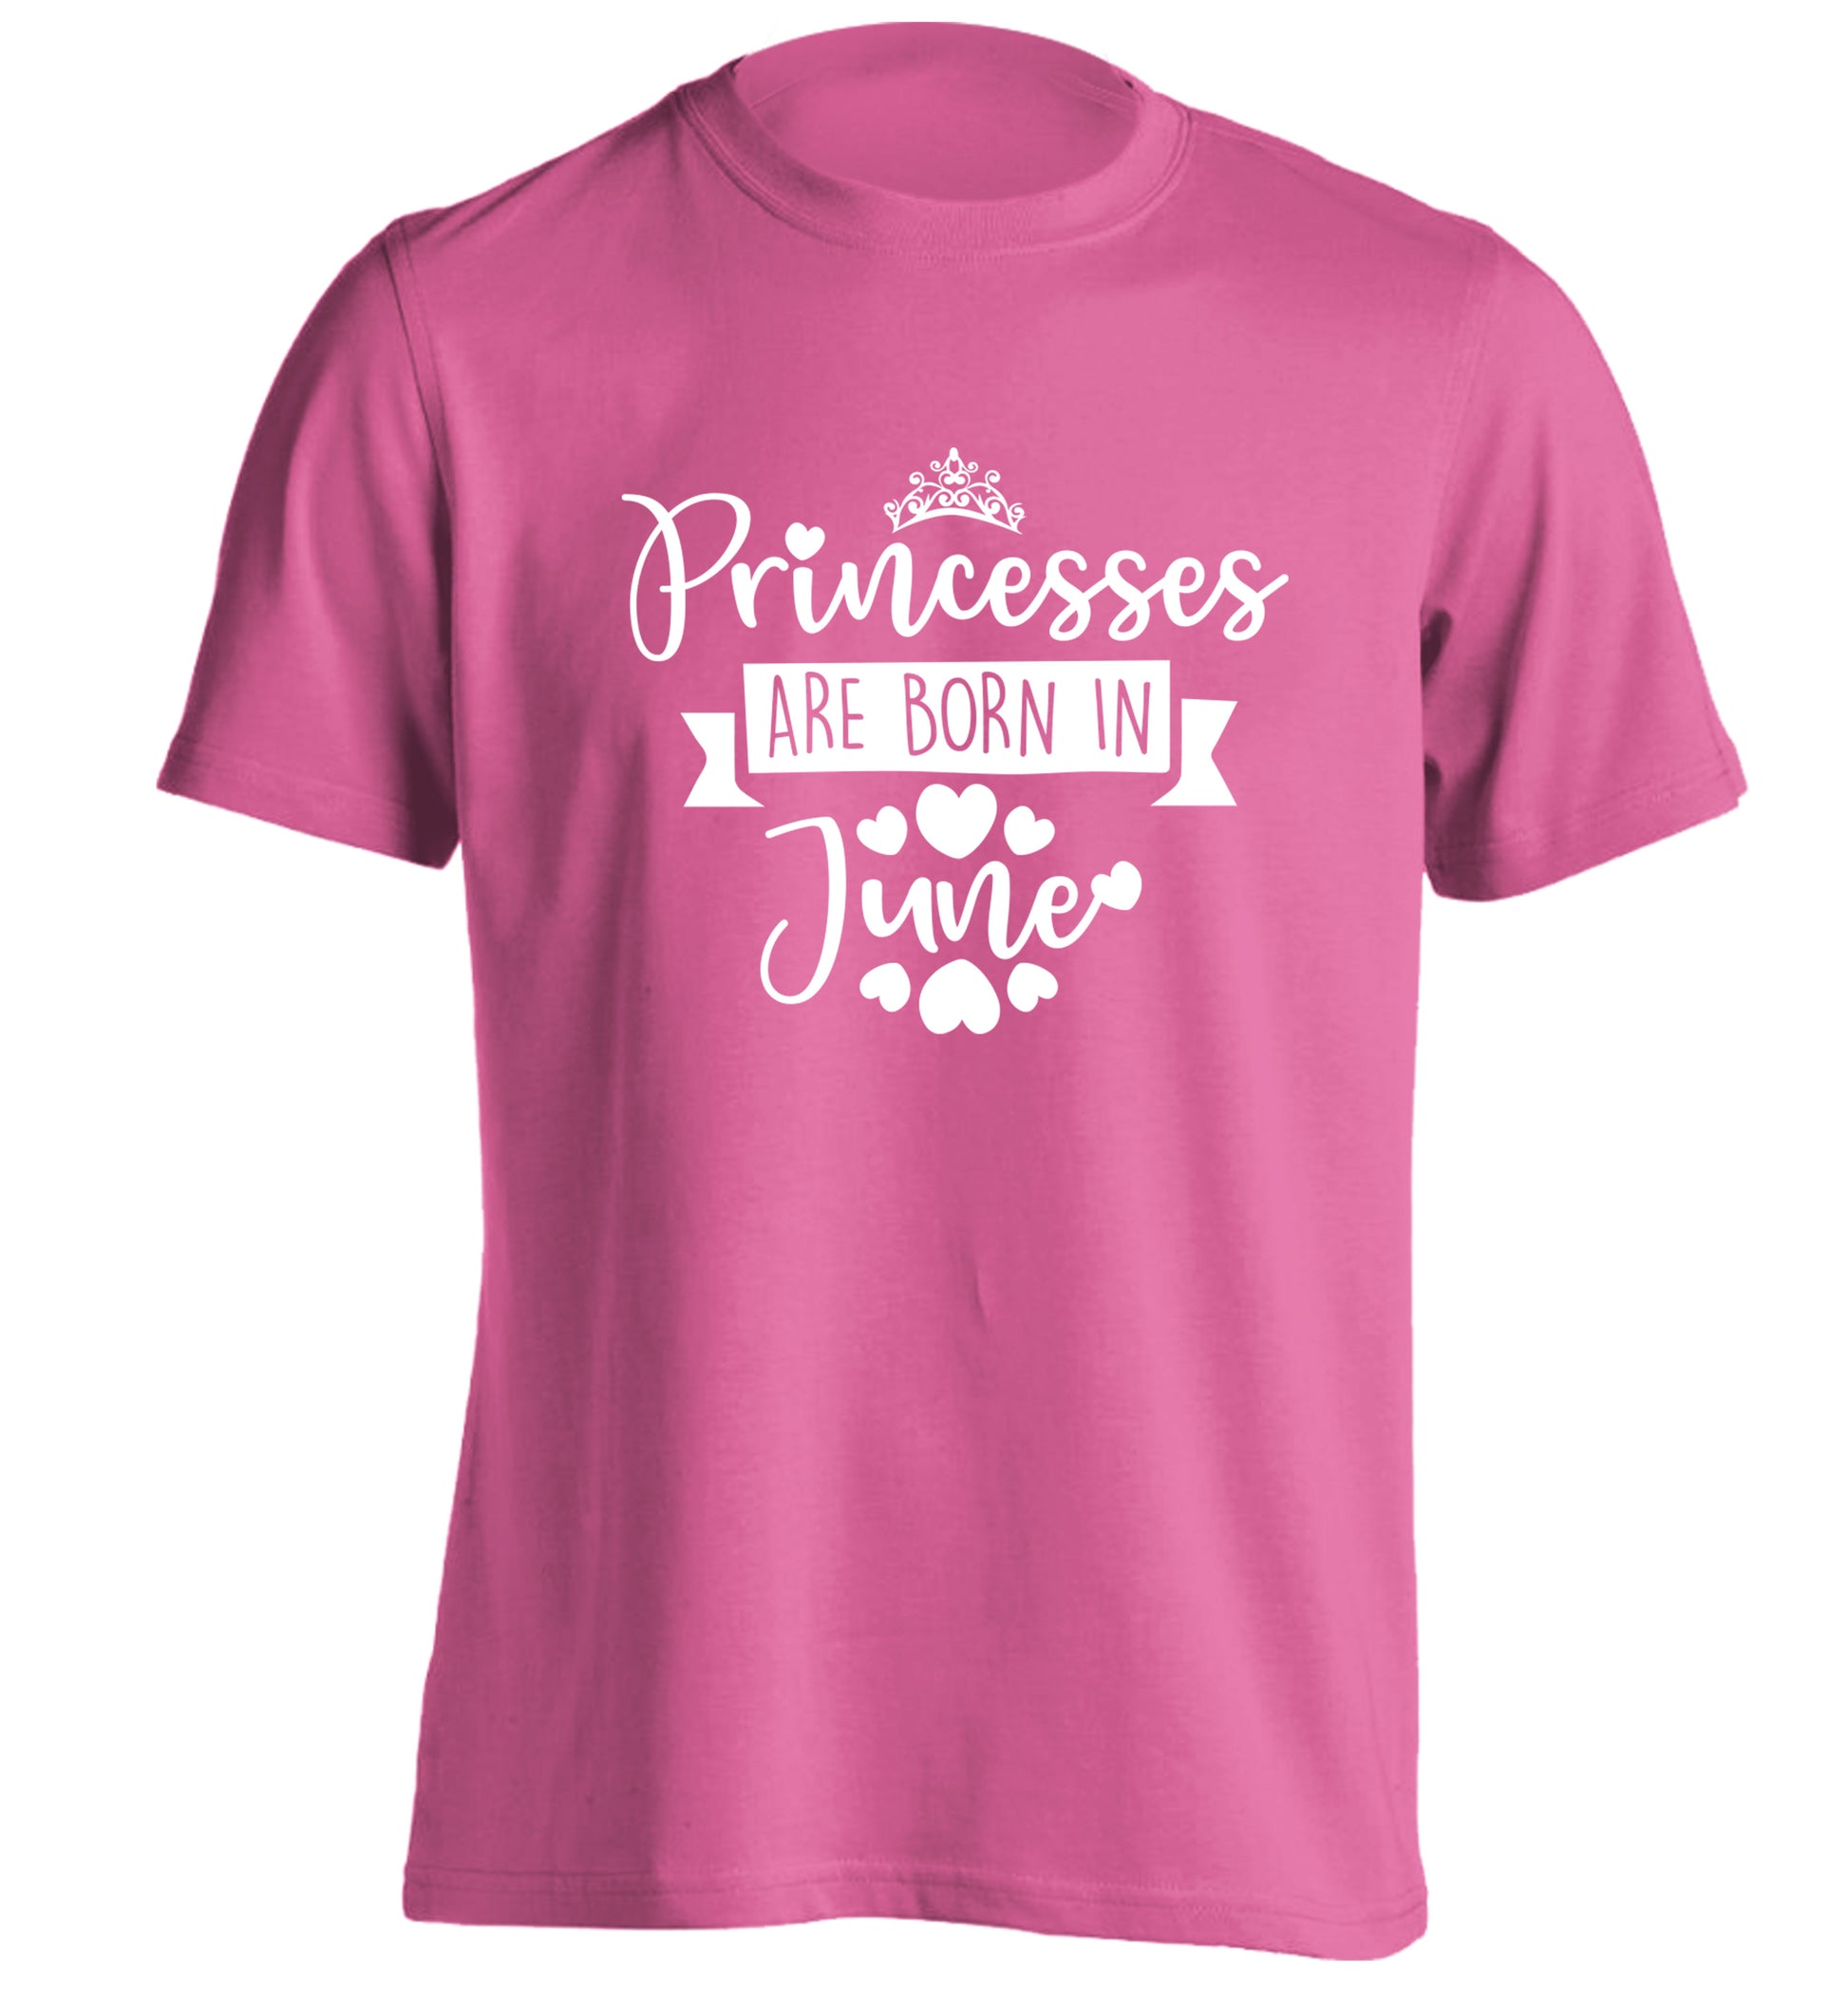 Princesses are born in June adults unisex pink Tshirt 2XL